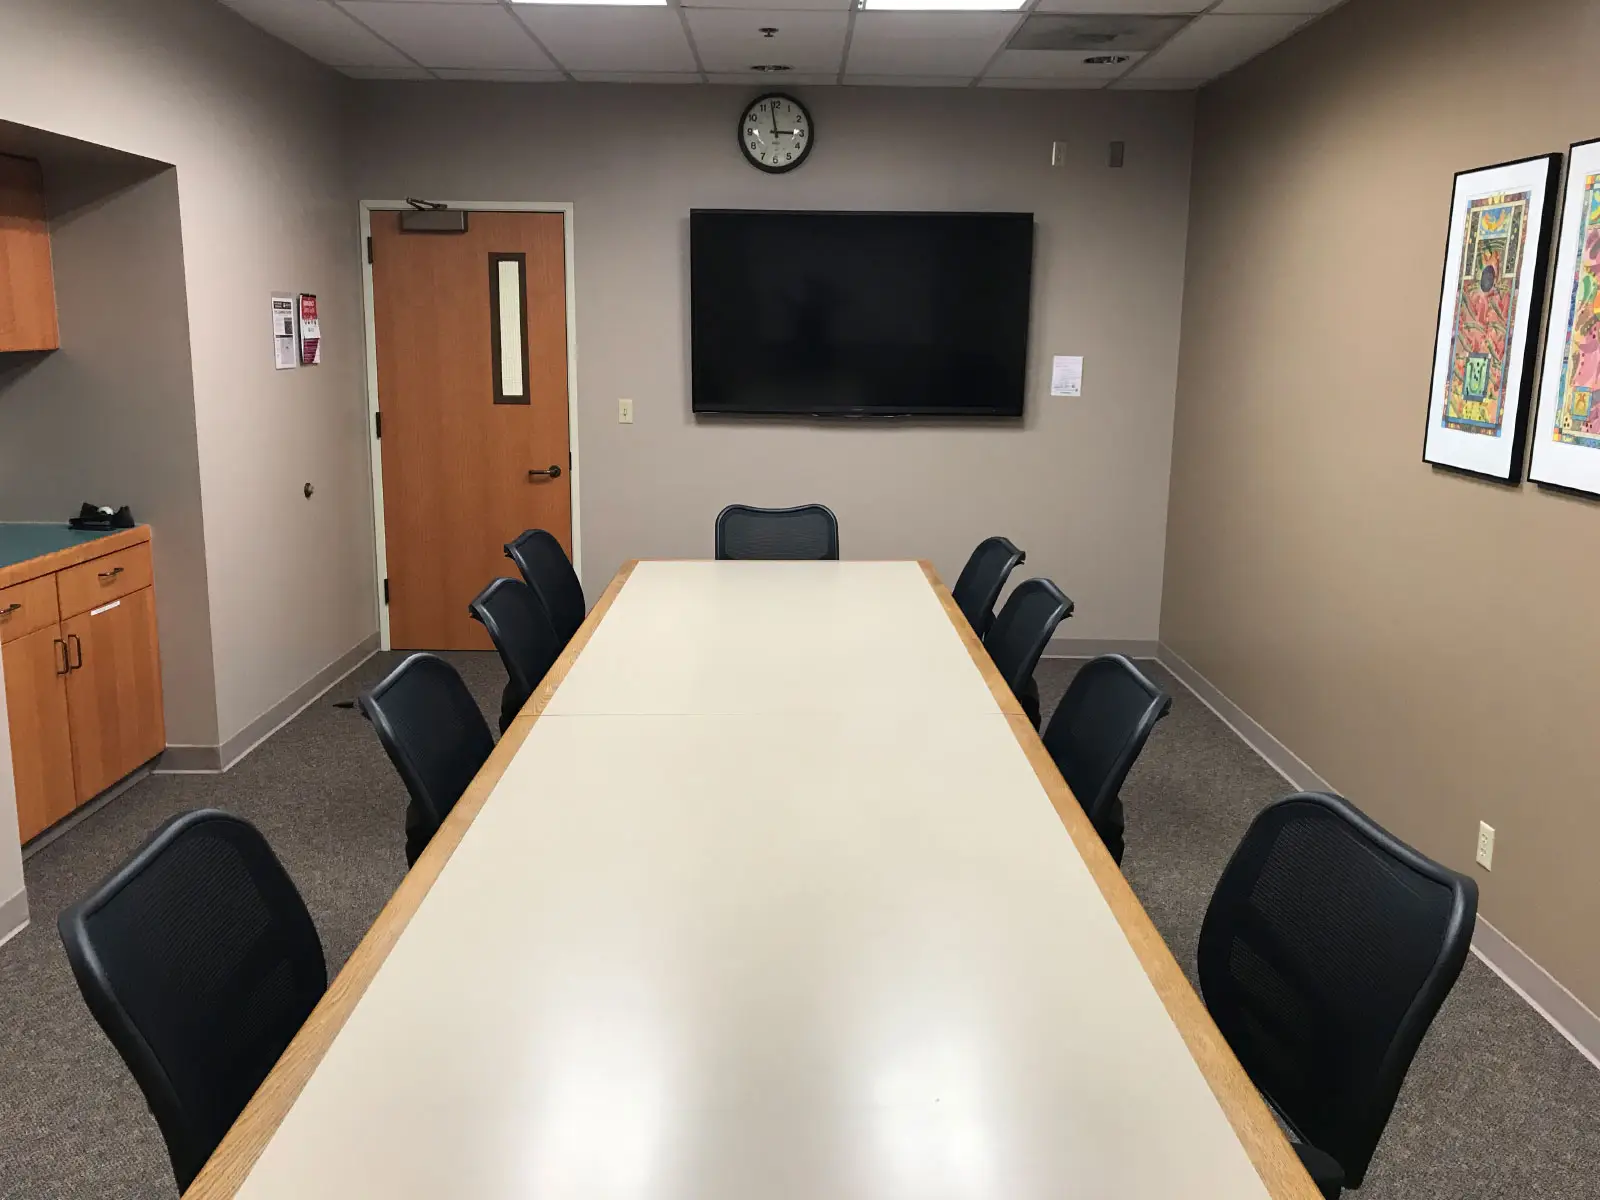 A long table with several chairs in a conference room with a TV display on the Oregon City campus